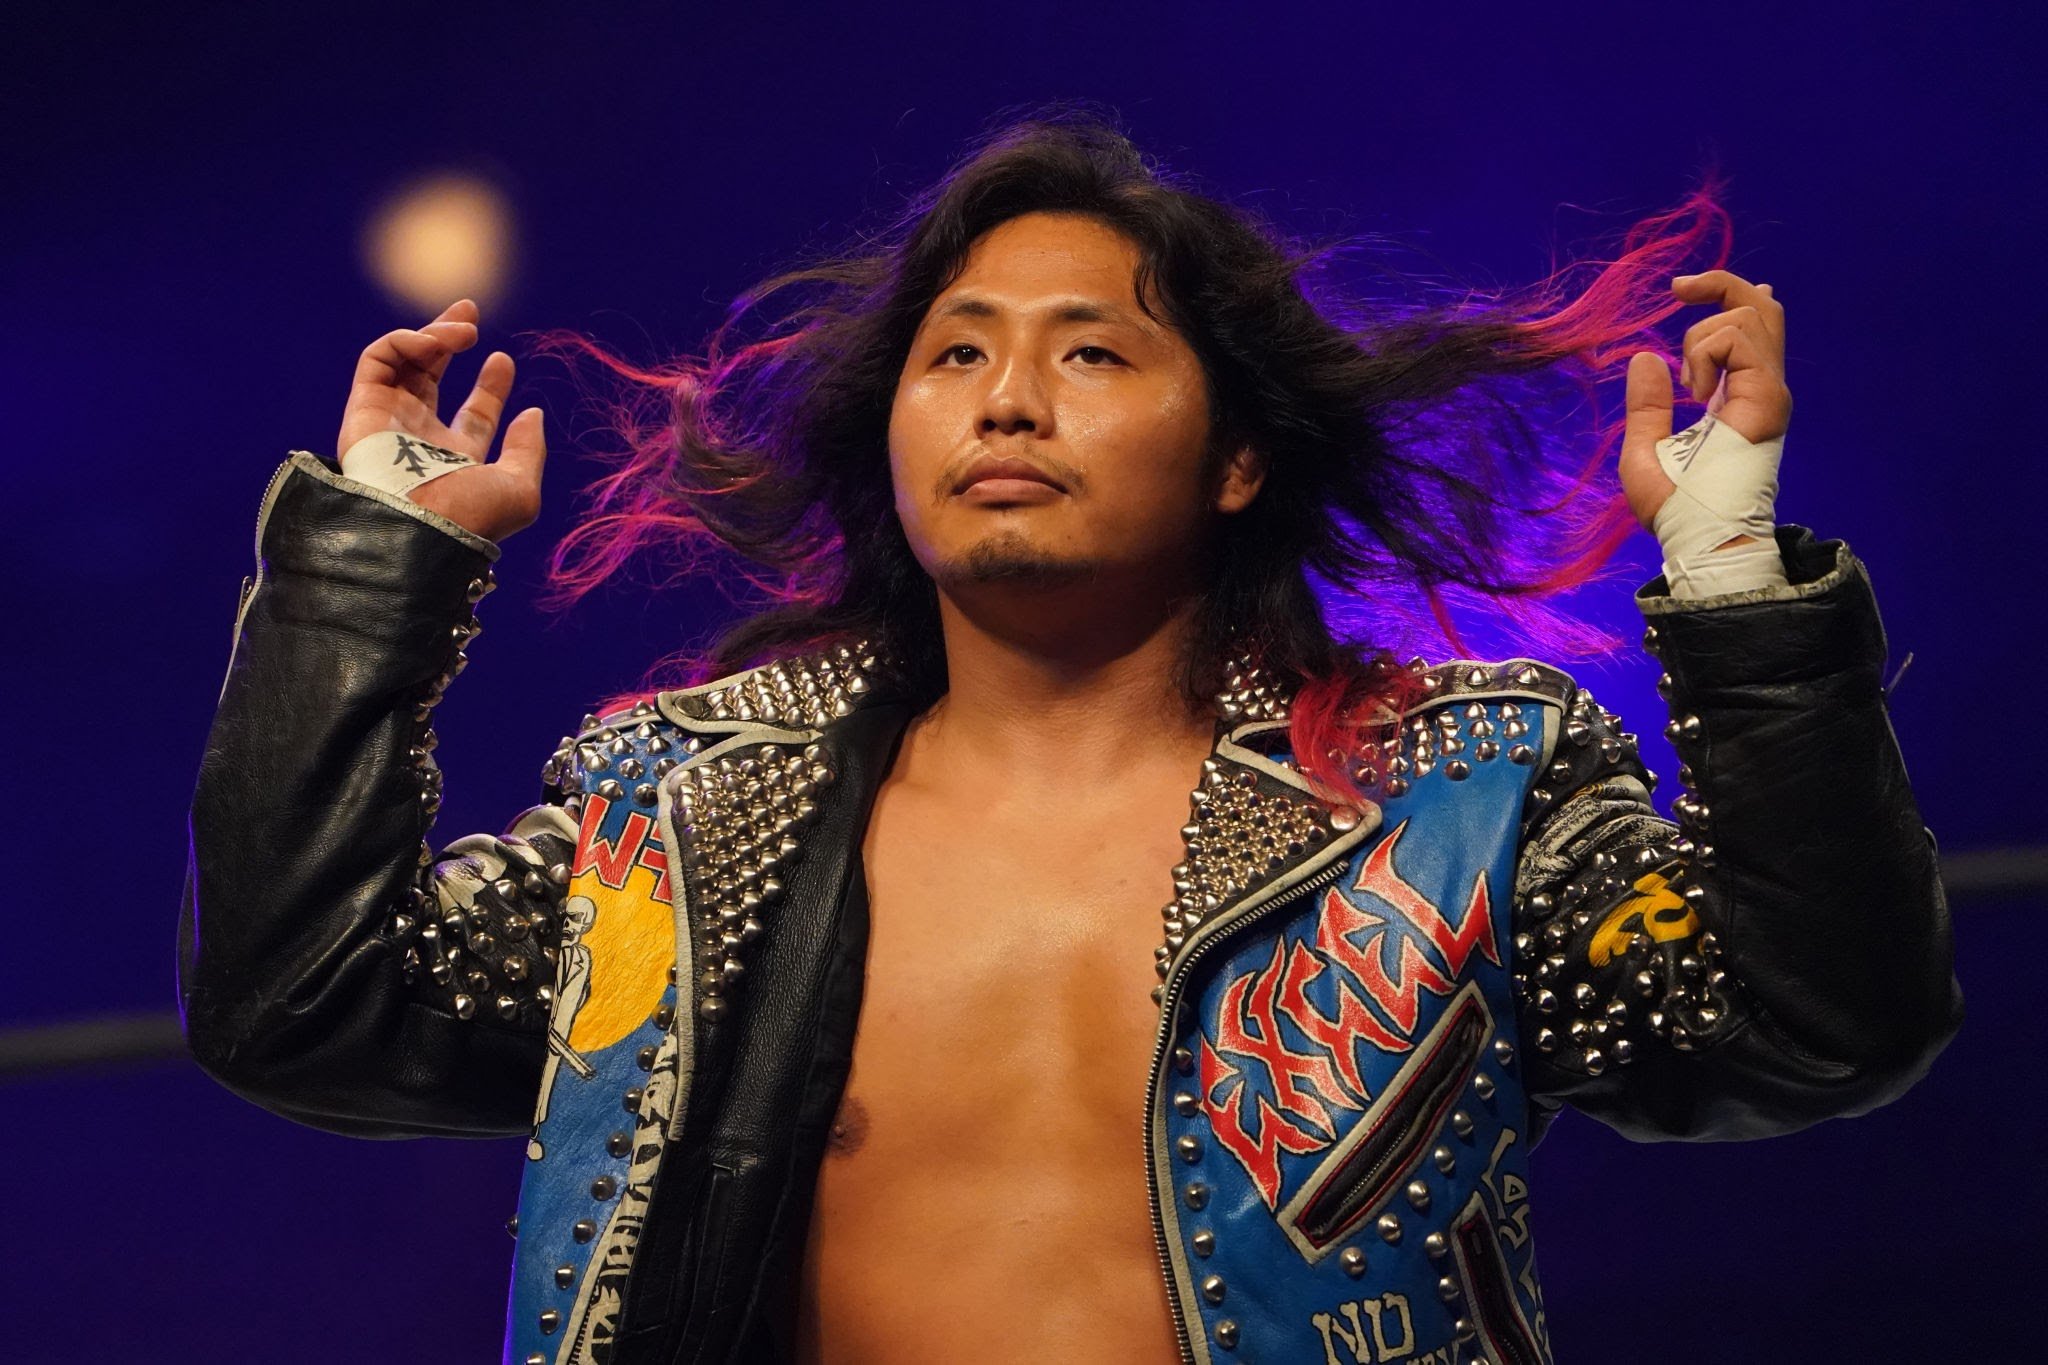 Hiromu Takahashi Extends Contract with NJPW